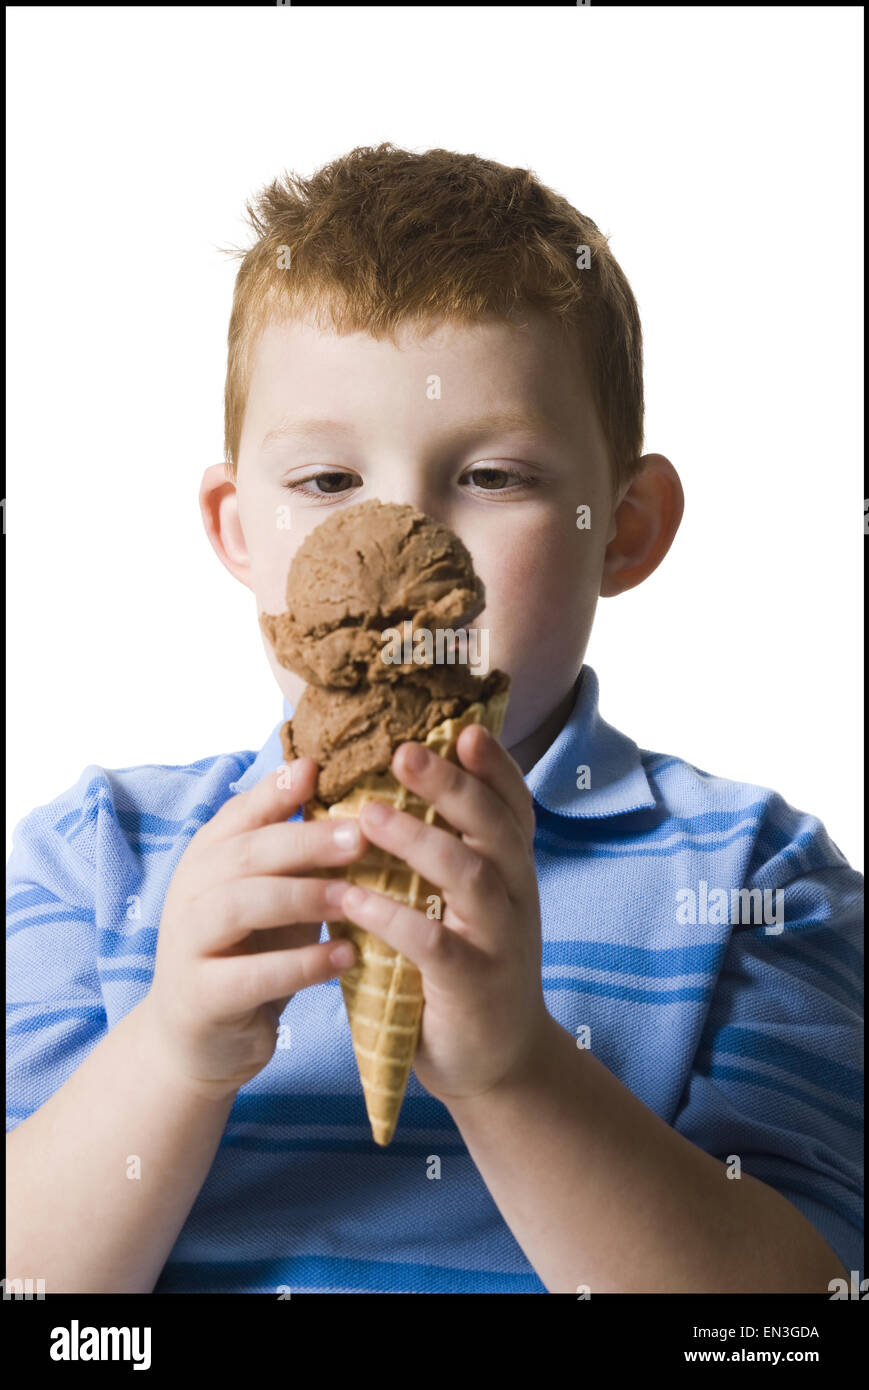 Boy holding an ice cream cone Banque D'Images